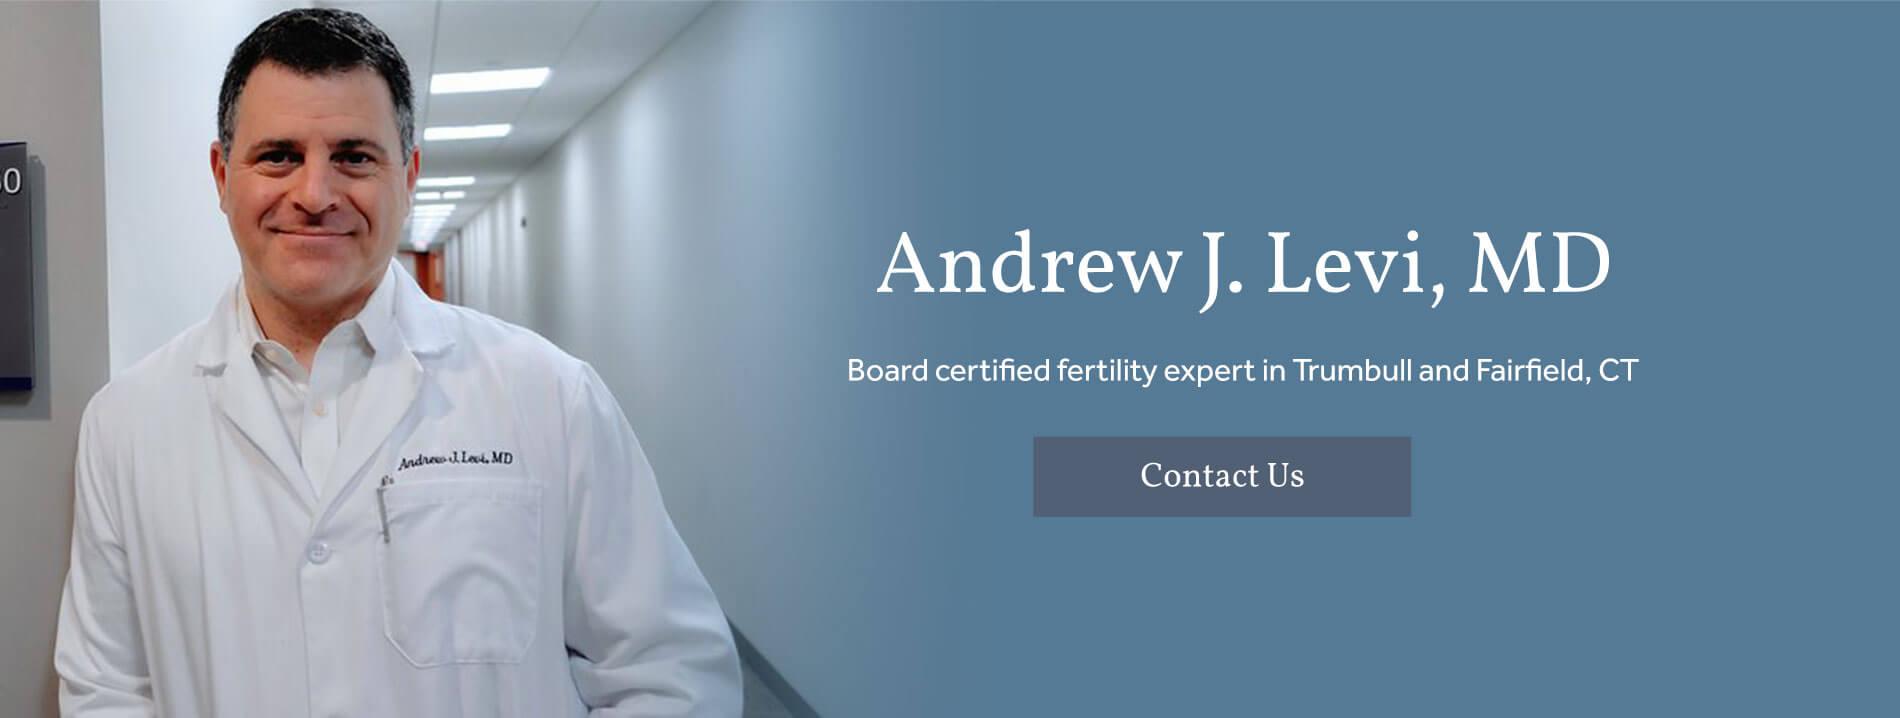 Andrew J. Levi, MD - Board certified fertility expert in Trumbull and Fairfield, CT